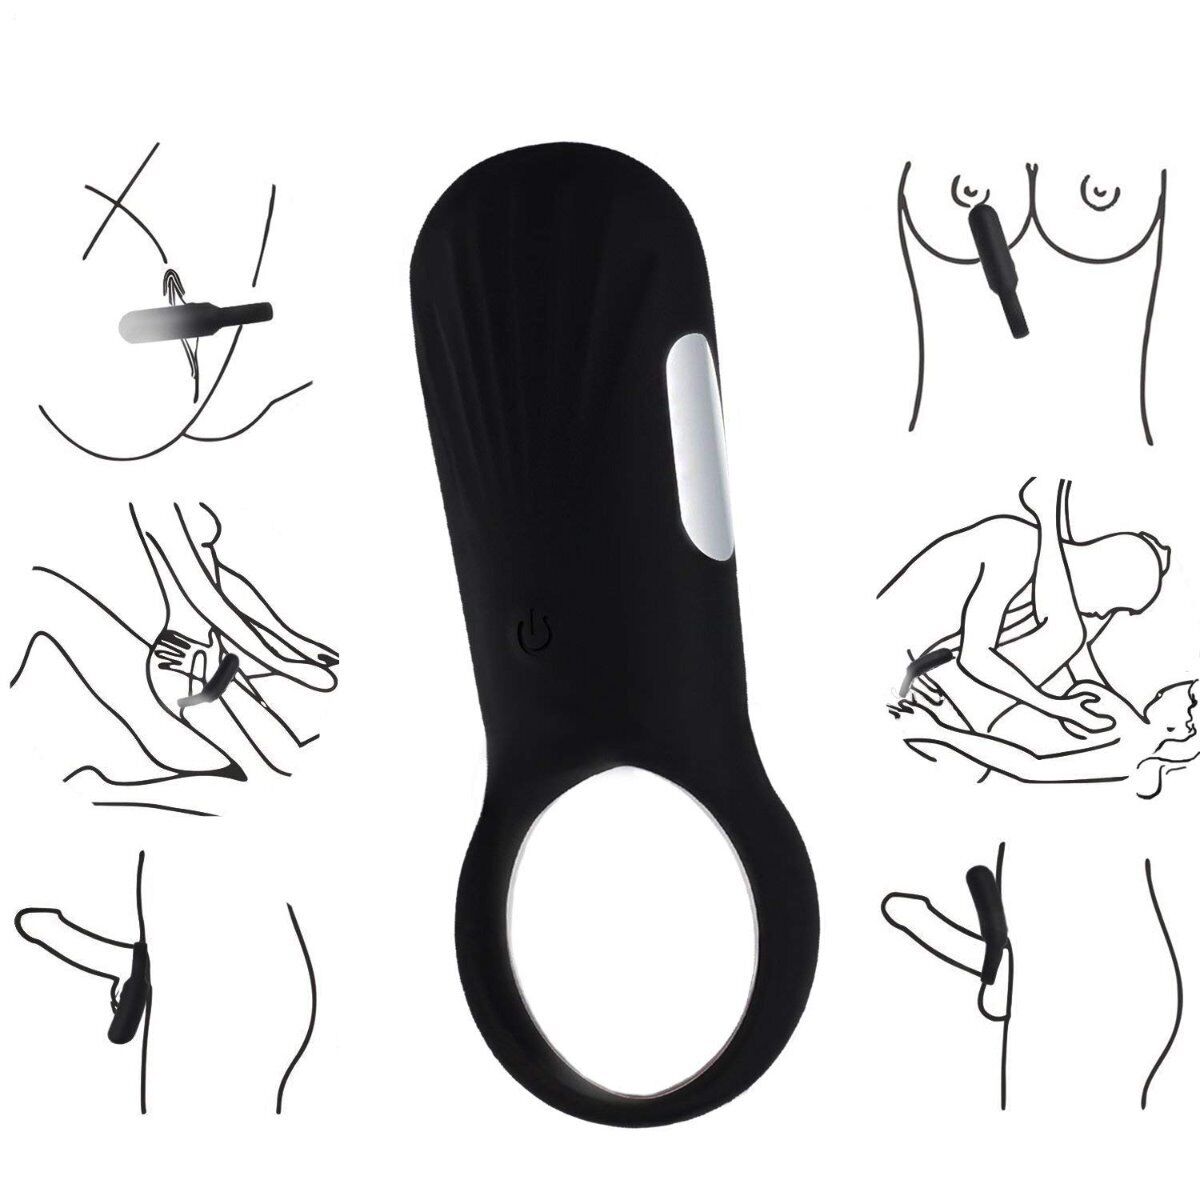 Rechargeable Vibrating Penis Cock Ring Prolong Delay Sex Toys for Men Couples